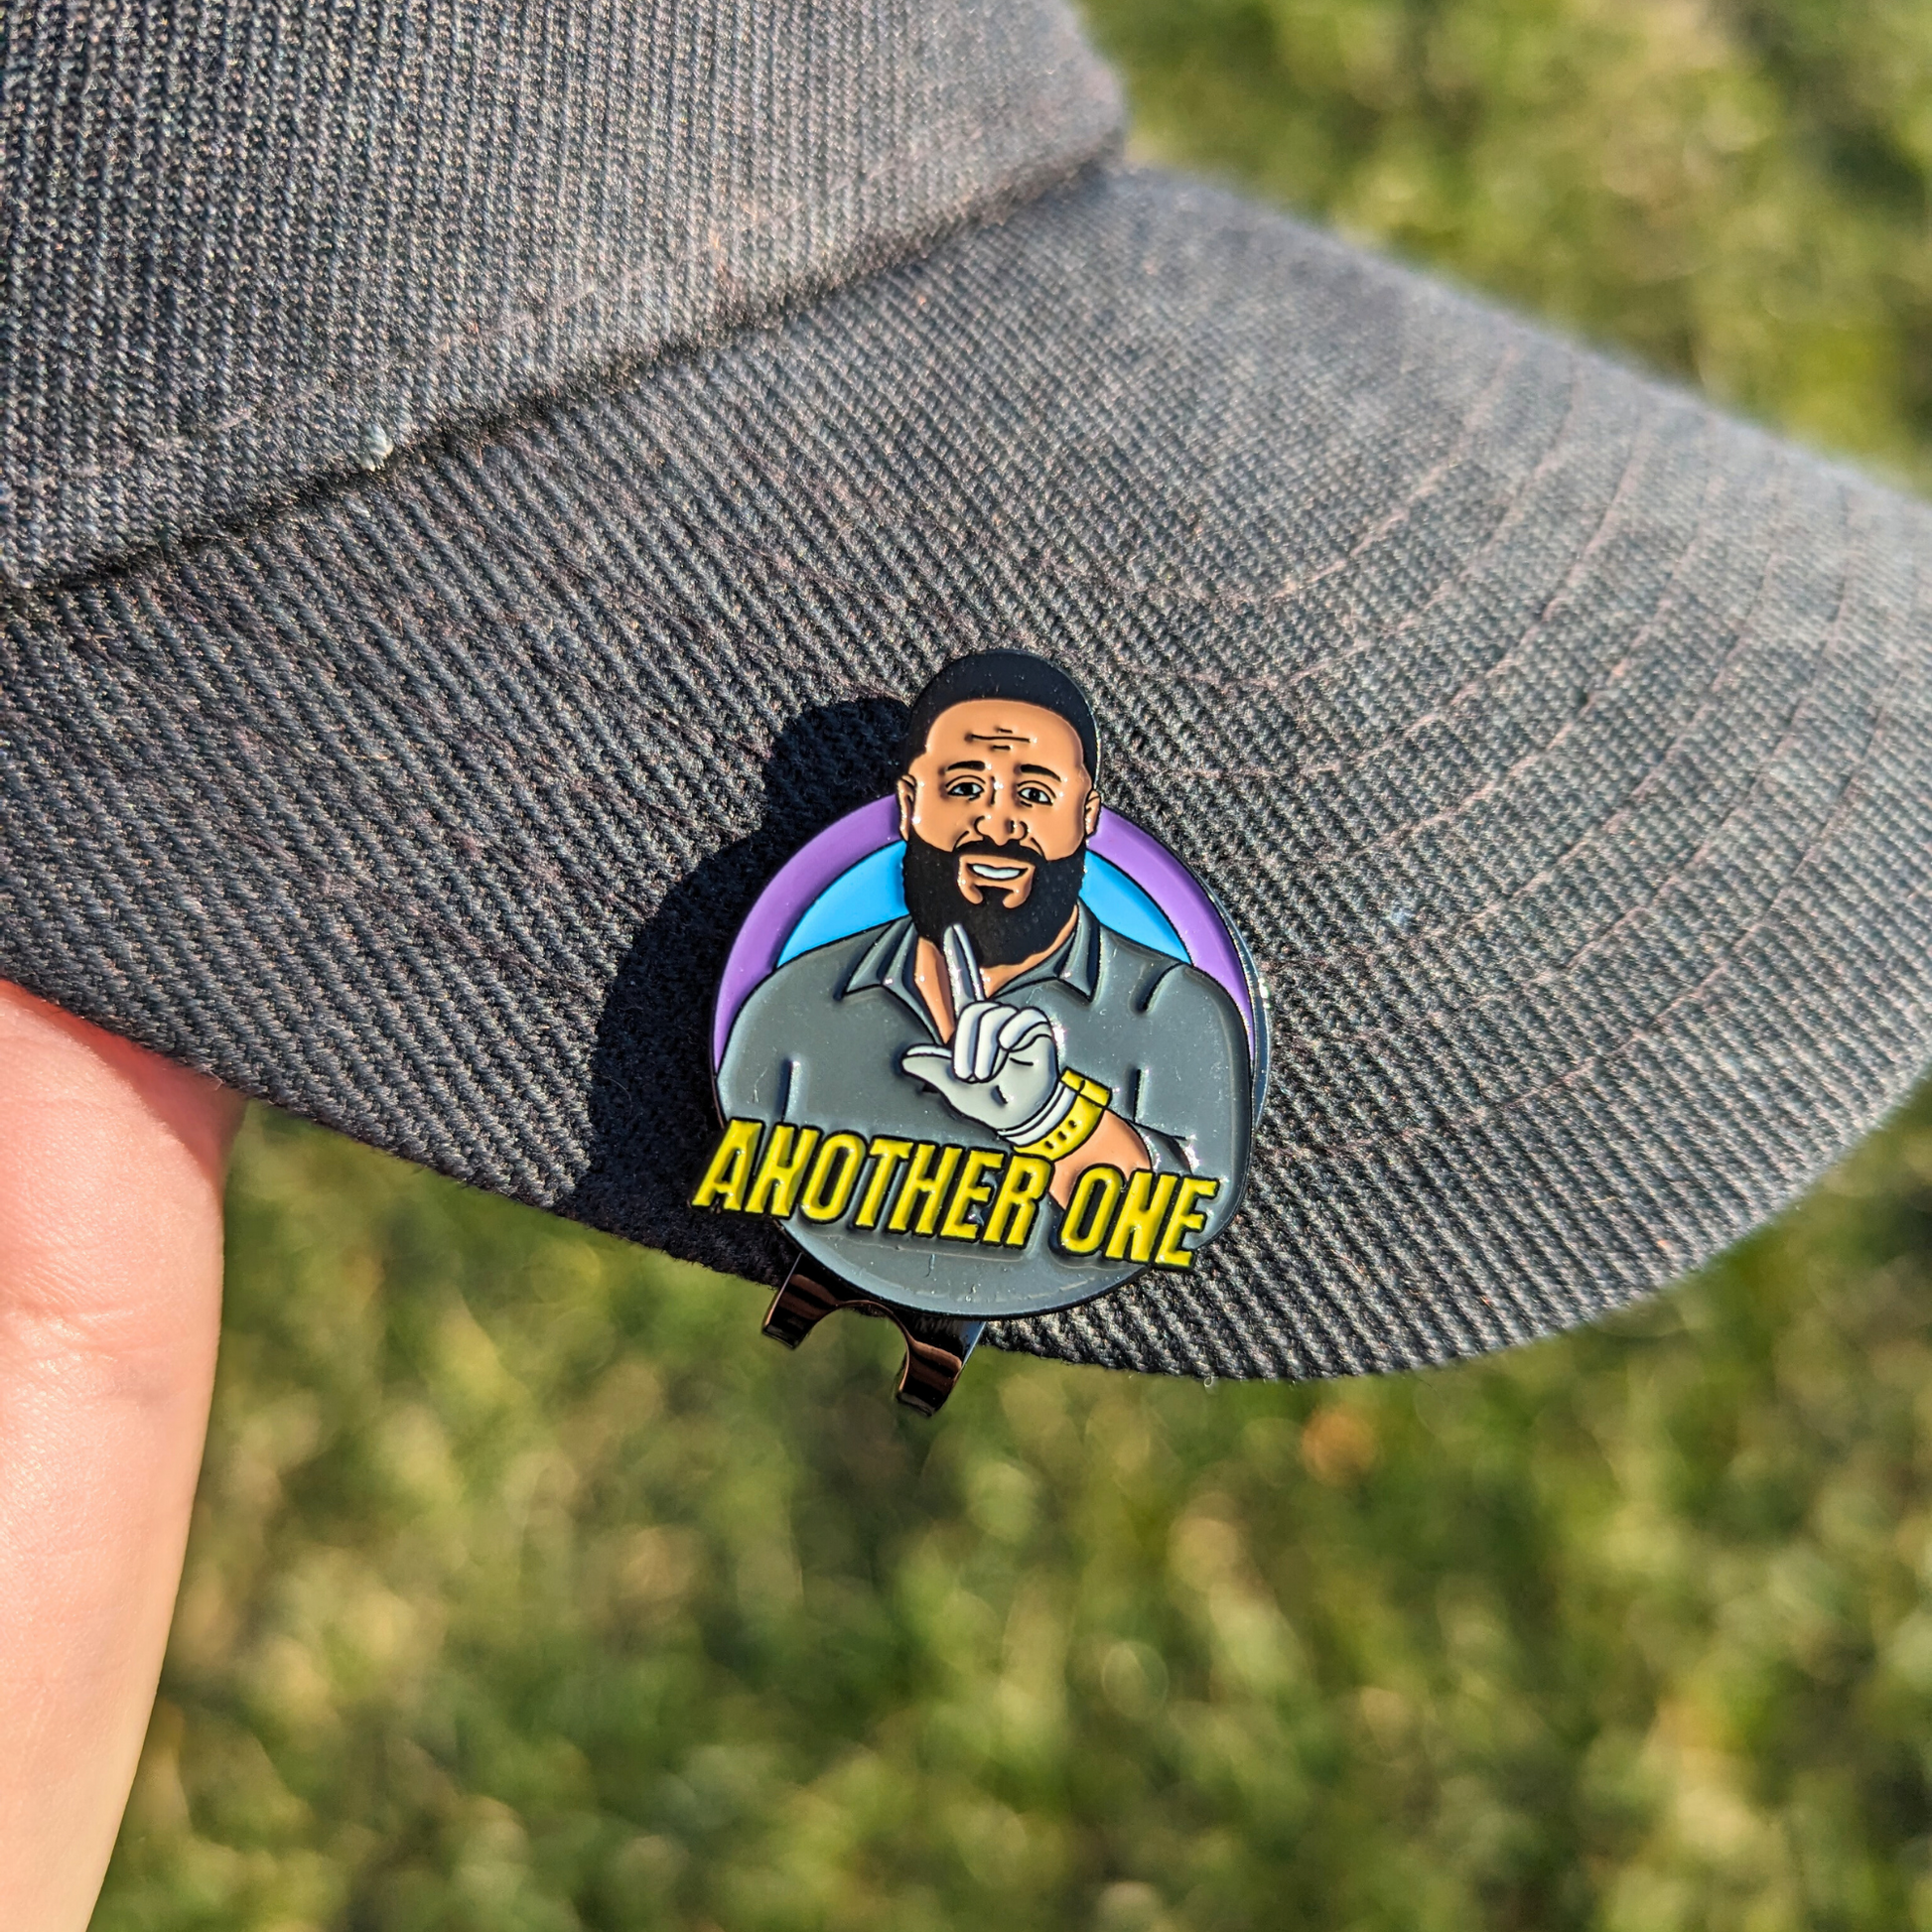 dj khaled another one golf ball marker on hat with clip